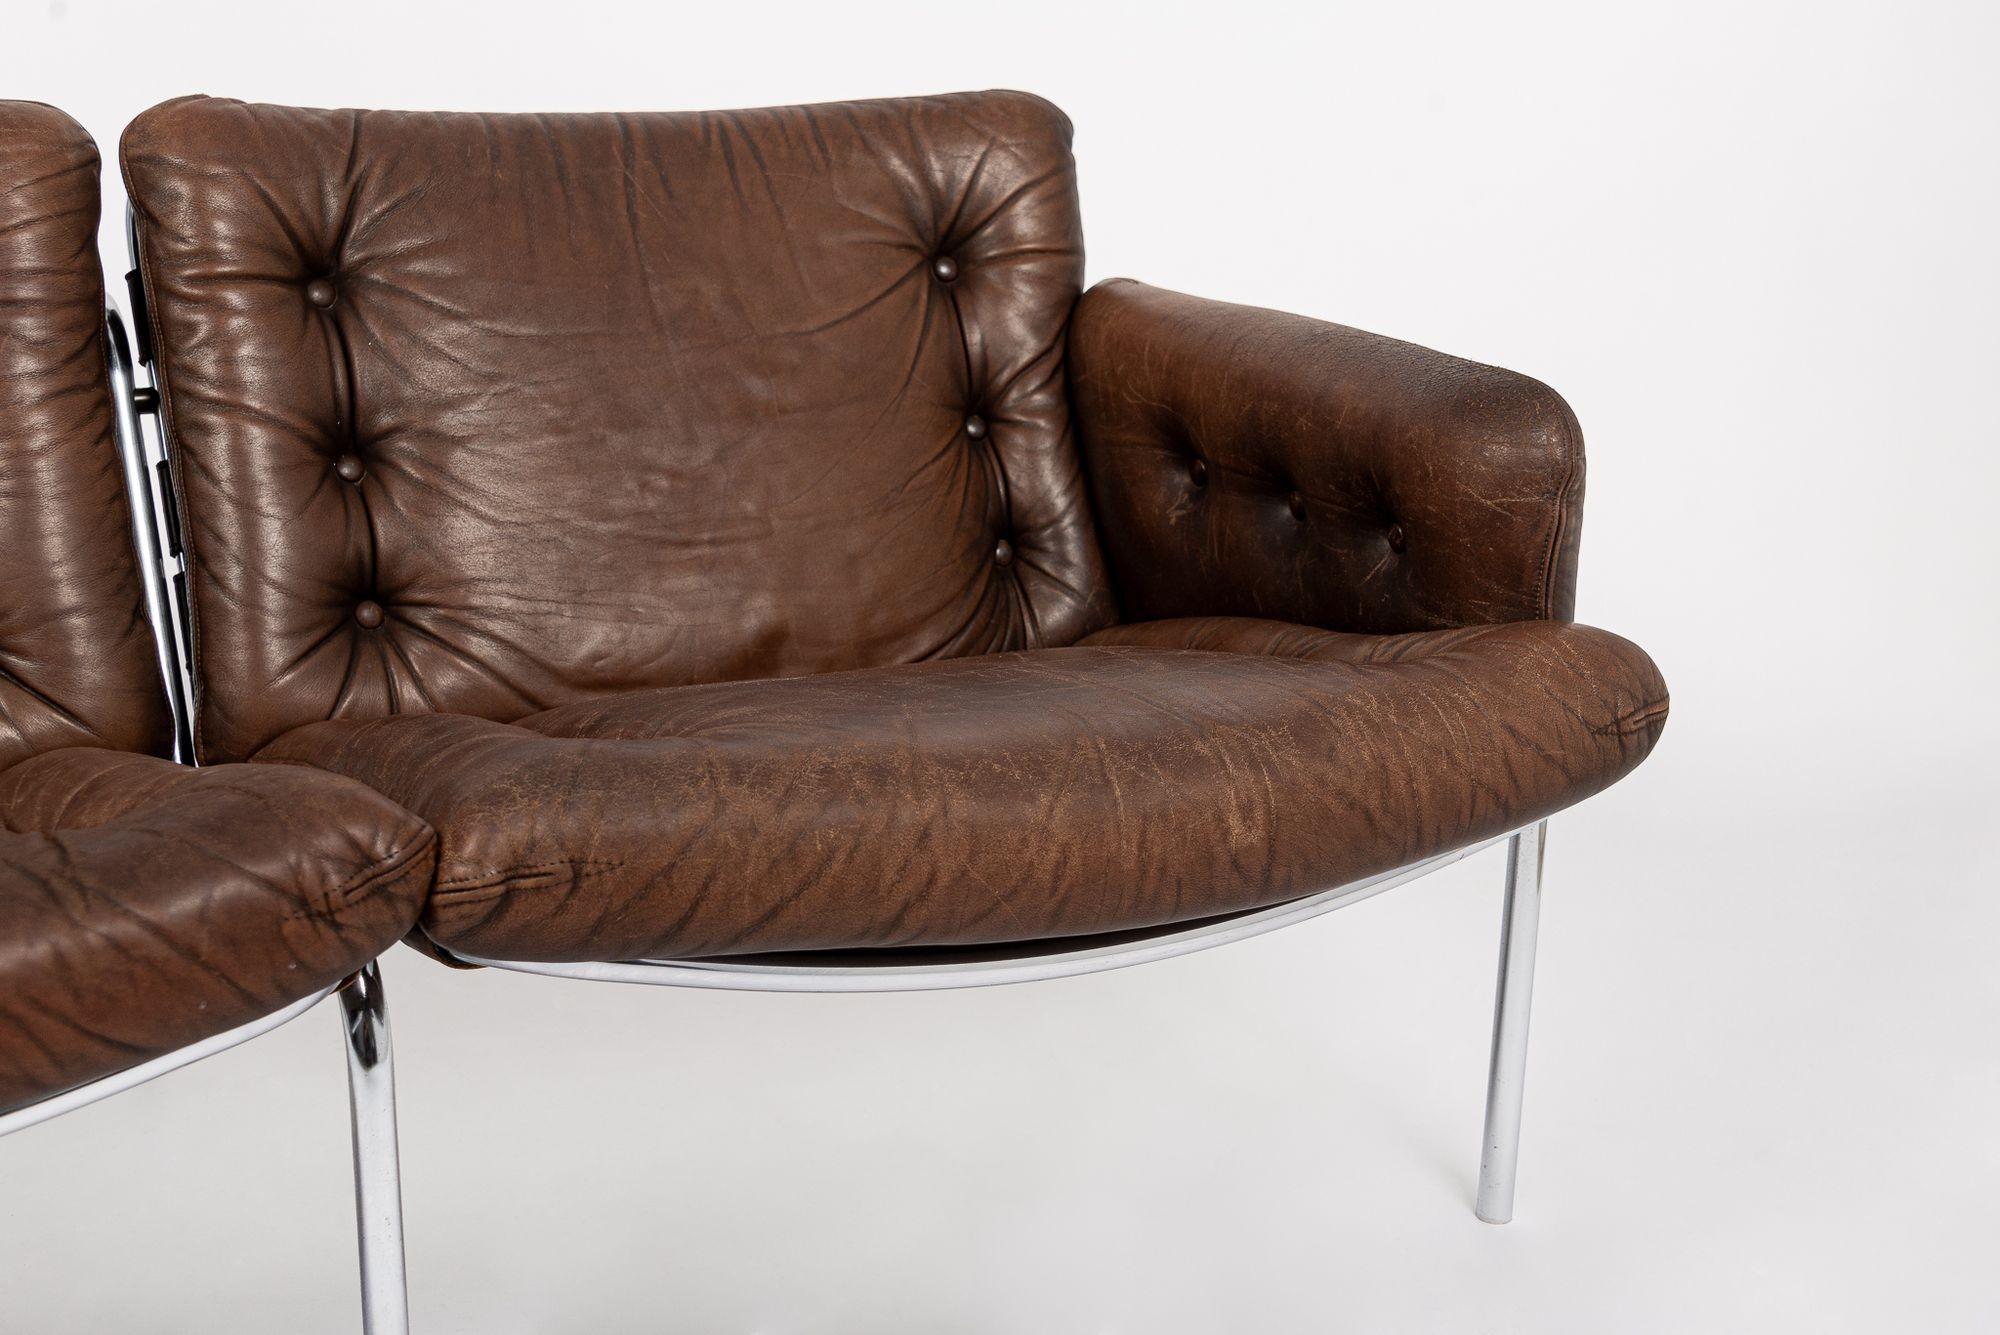 Steel Mid Century Modern Brown Leather Loveseat Sofa 1970s For Sale